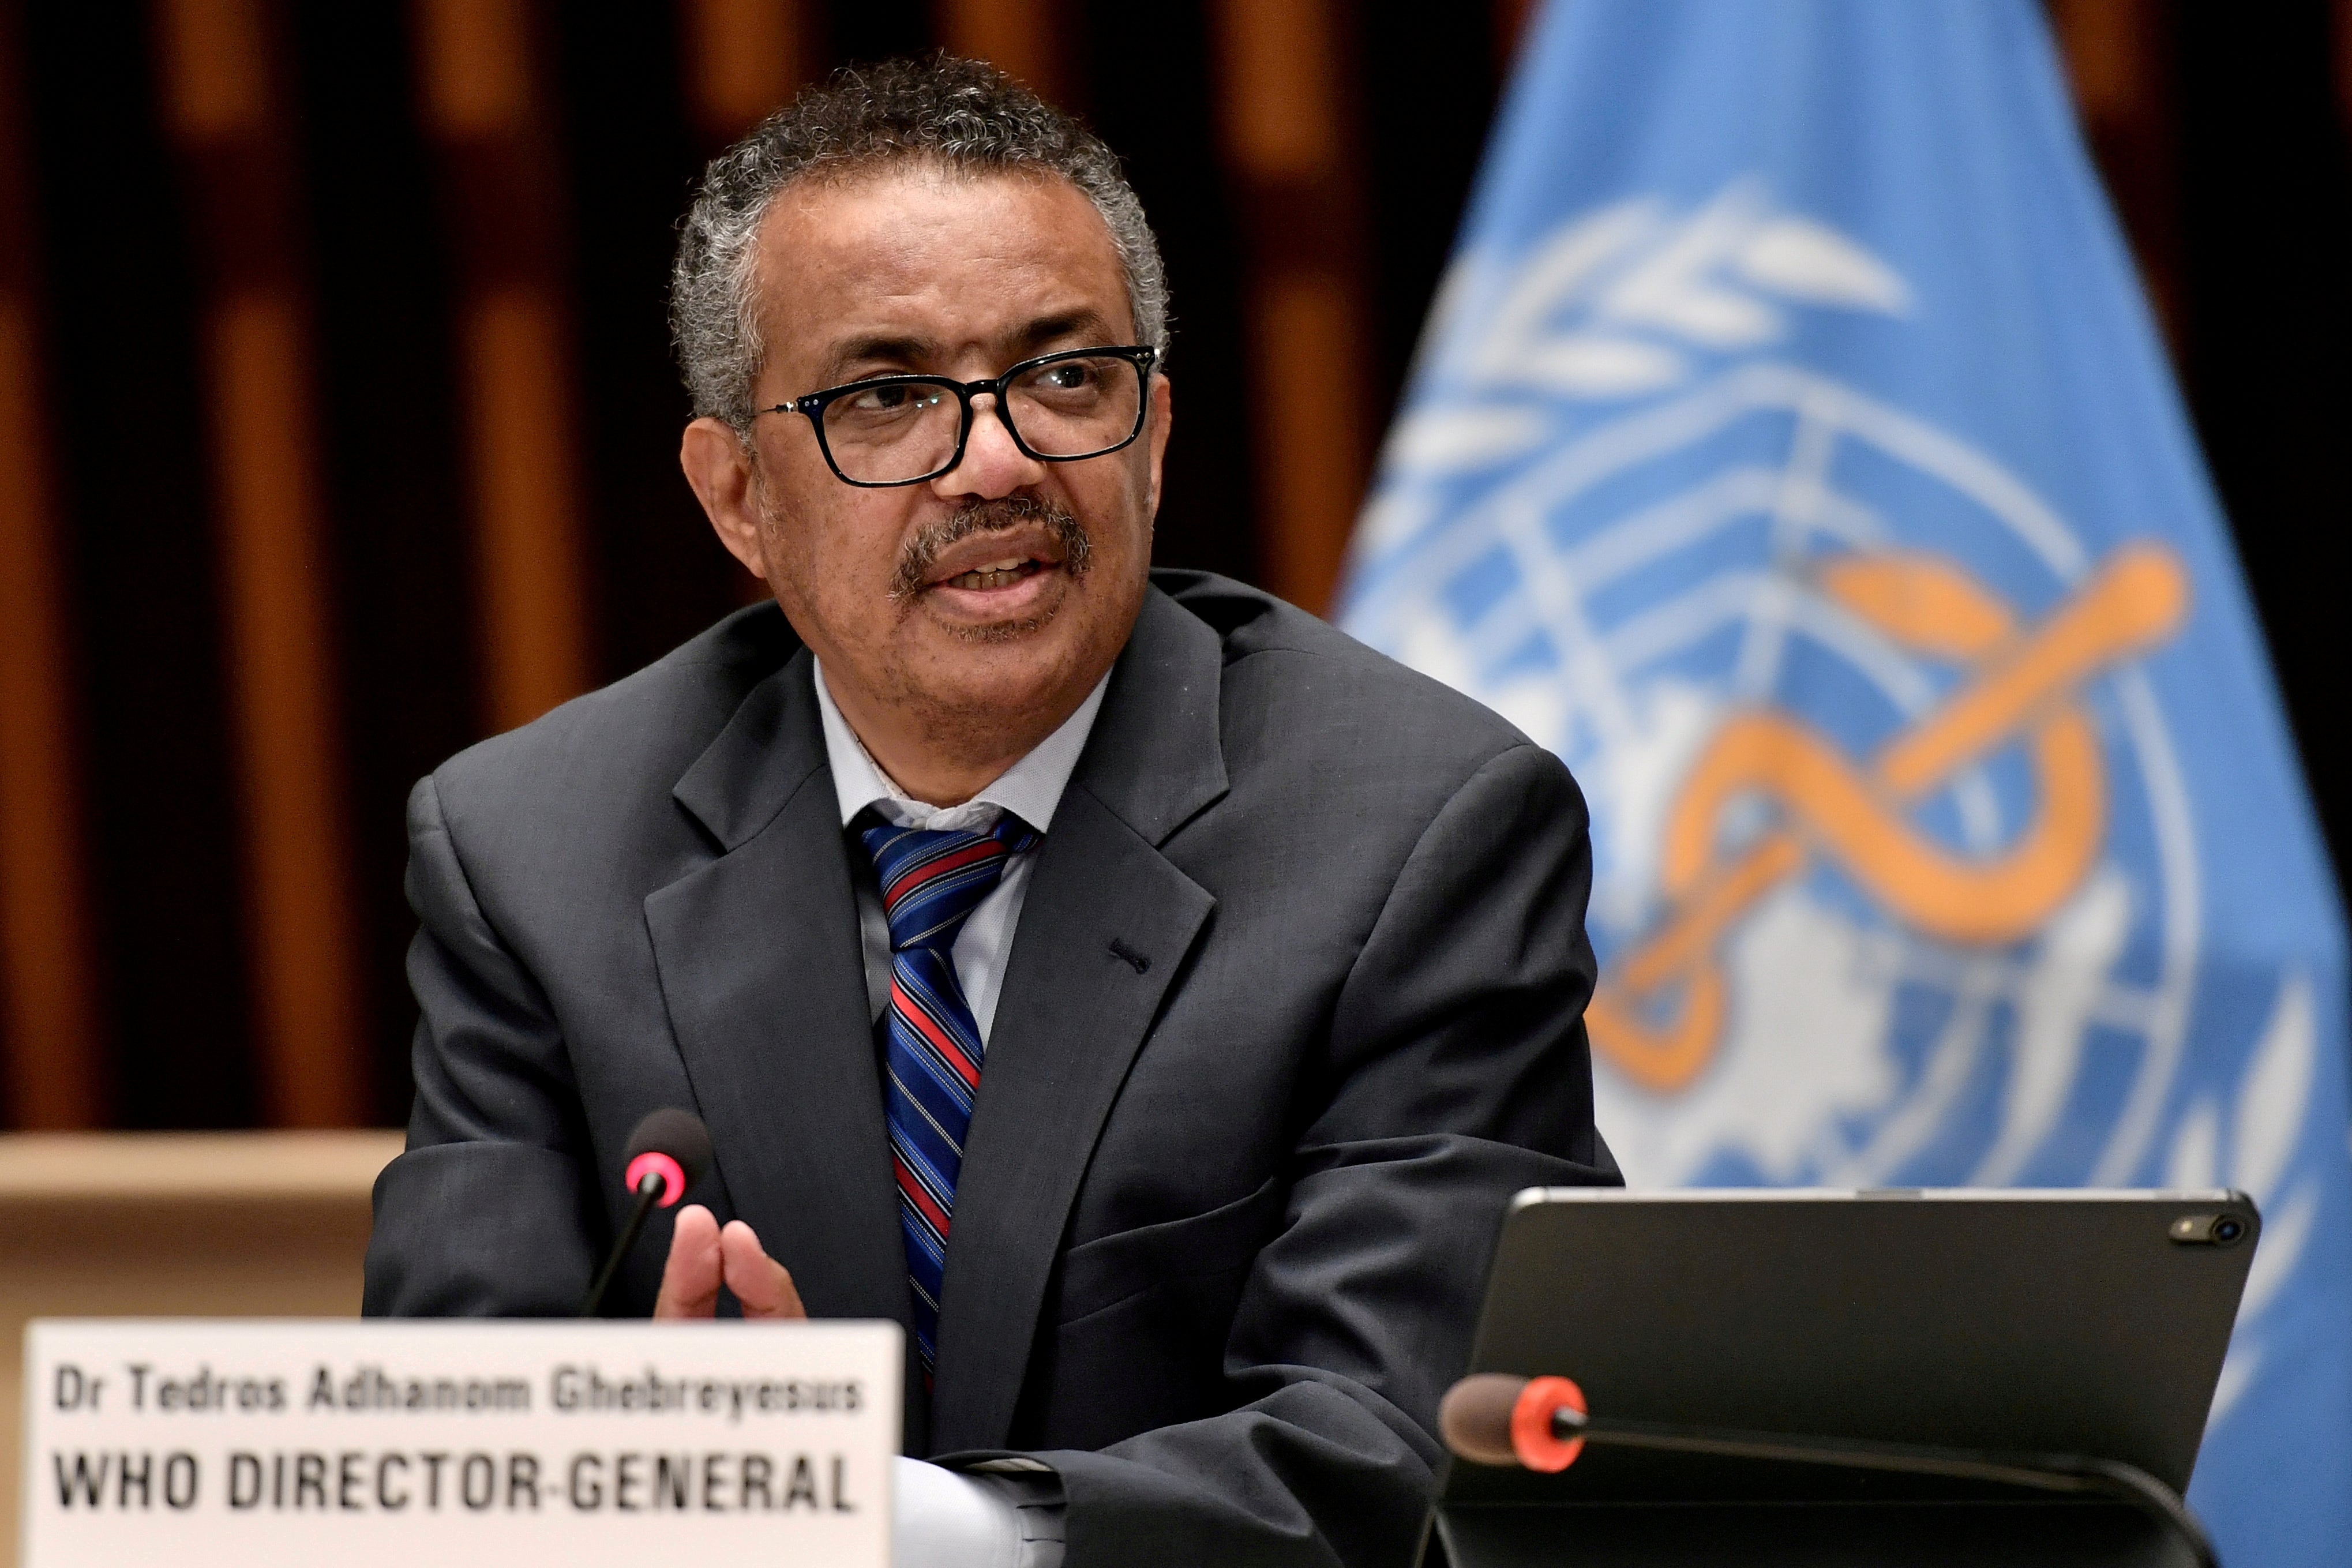 Tedros Adhanom Ghebreyesus, the director-general of the World Health Organization, is shown at a press conference in Geneva, Switzerland, on 3 July, 2020.